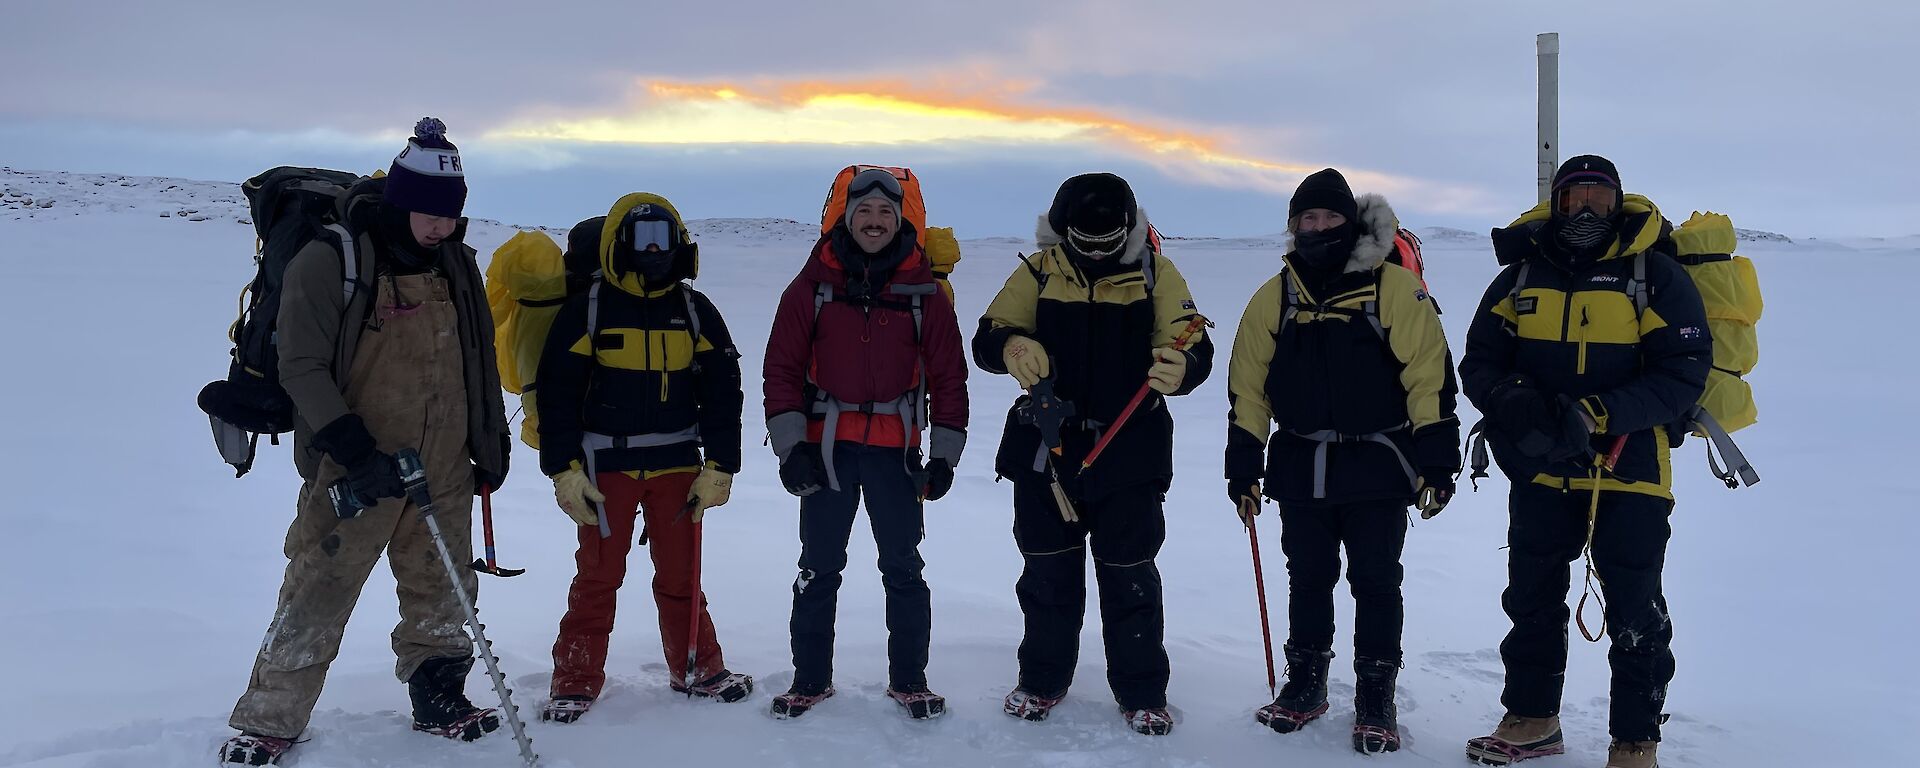 Six people in robust weatherproof clothing including face coverings, thick gloves and padded jackets, standing on a flat, snow-covered stretch of sea ice. They are all wearing large backpacks and carrying ice axes. One holds a powered drill with a metre-long drill flight attached